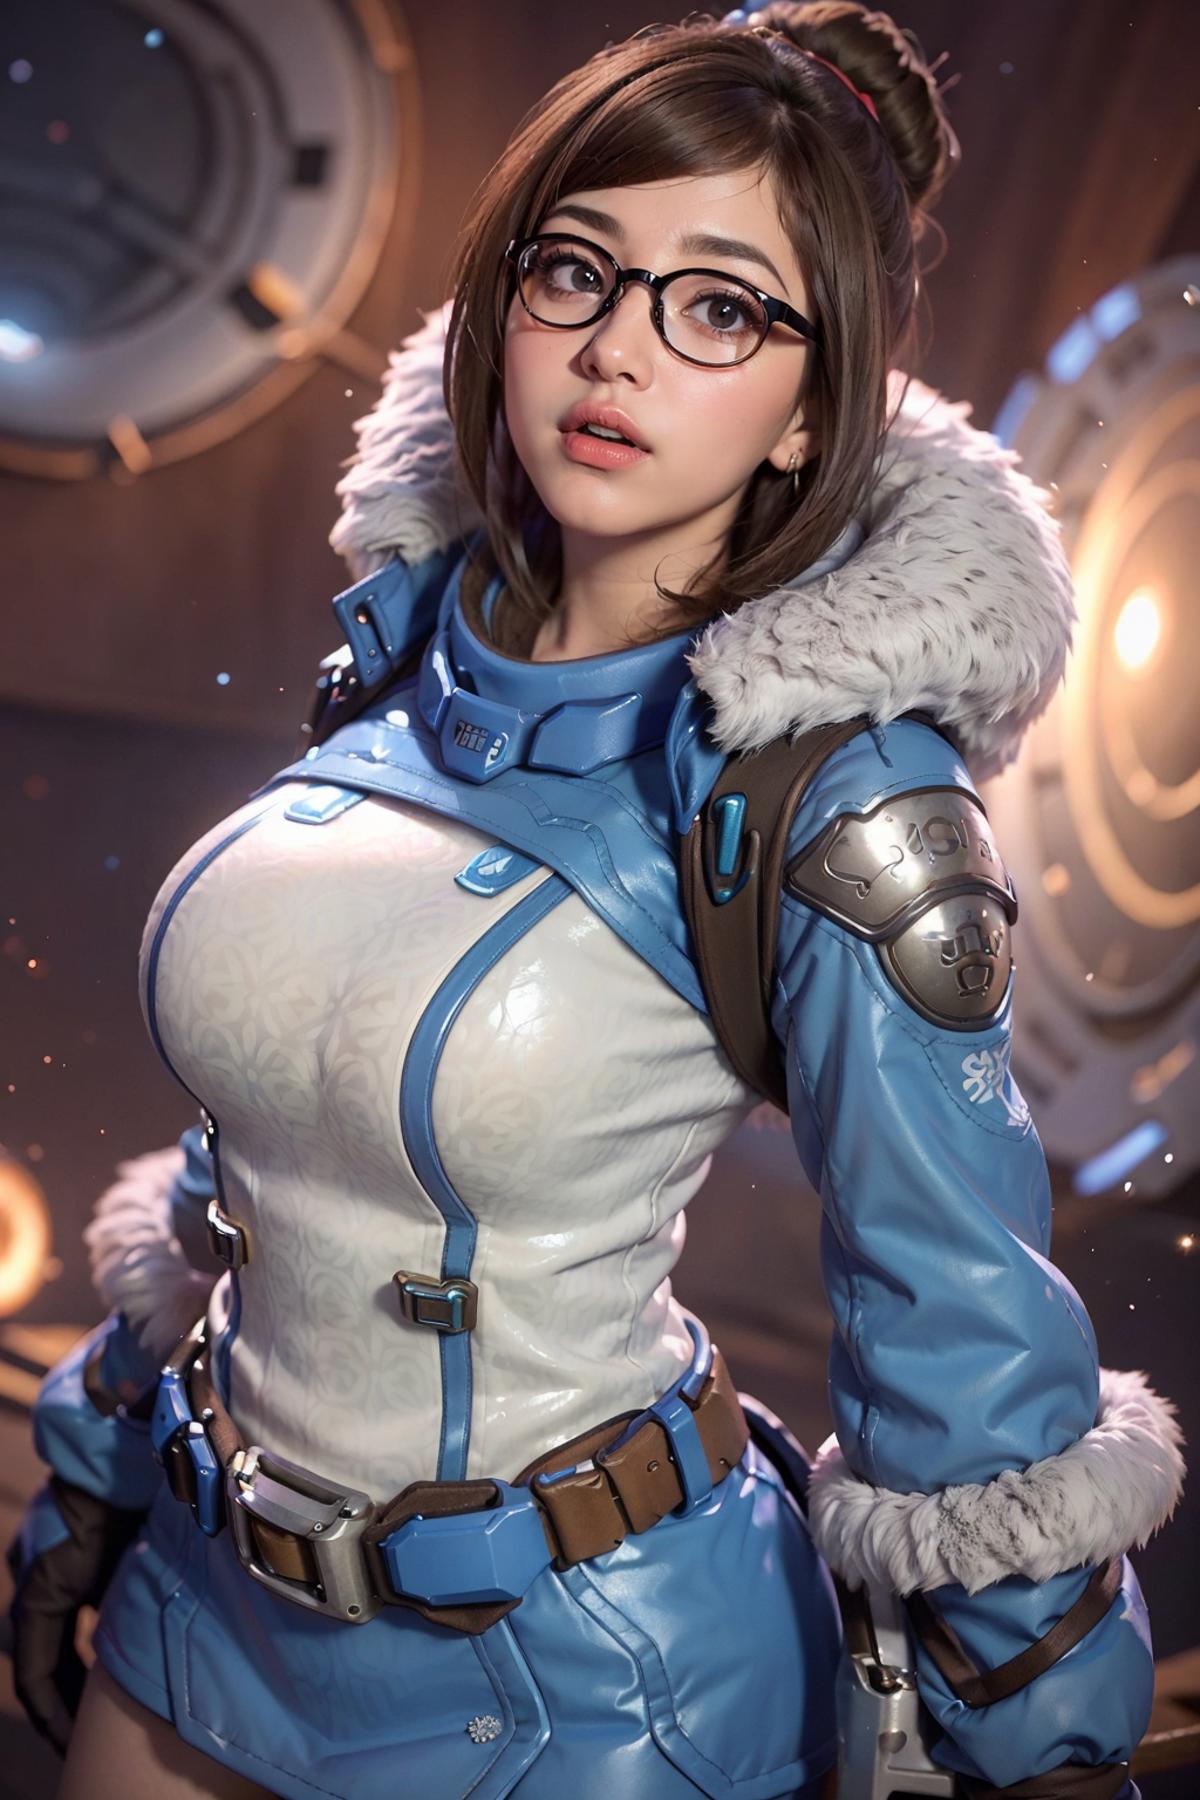 Mei from Overwatch image by Darknoice